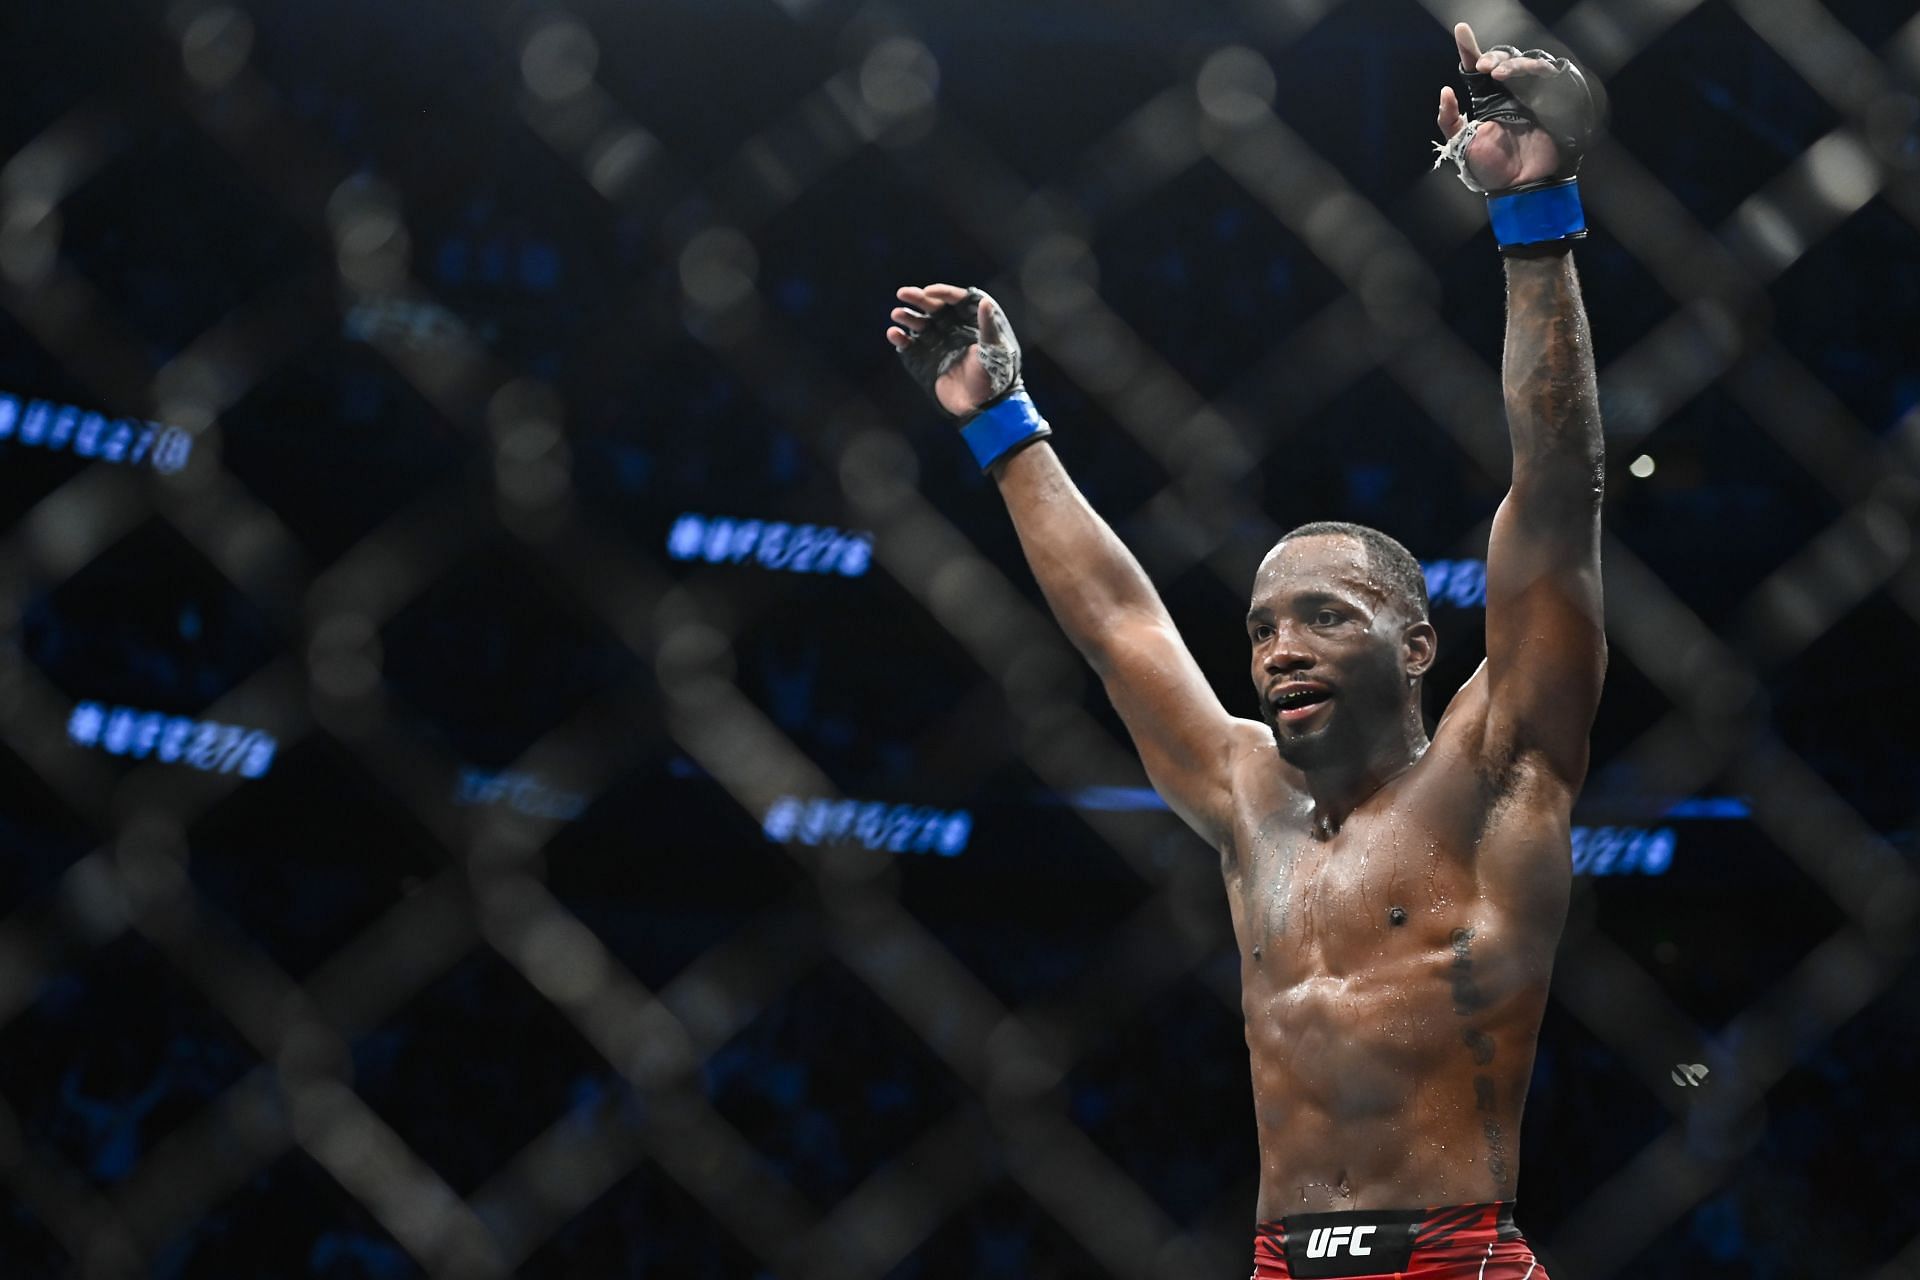 Leon Edwards stunned the world by defeating Kamaru Usman for the welterweight title